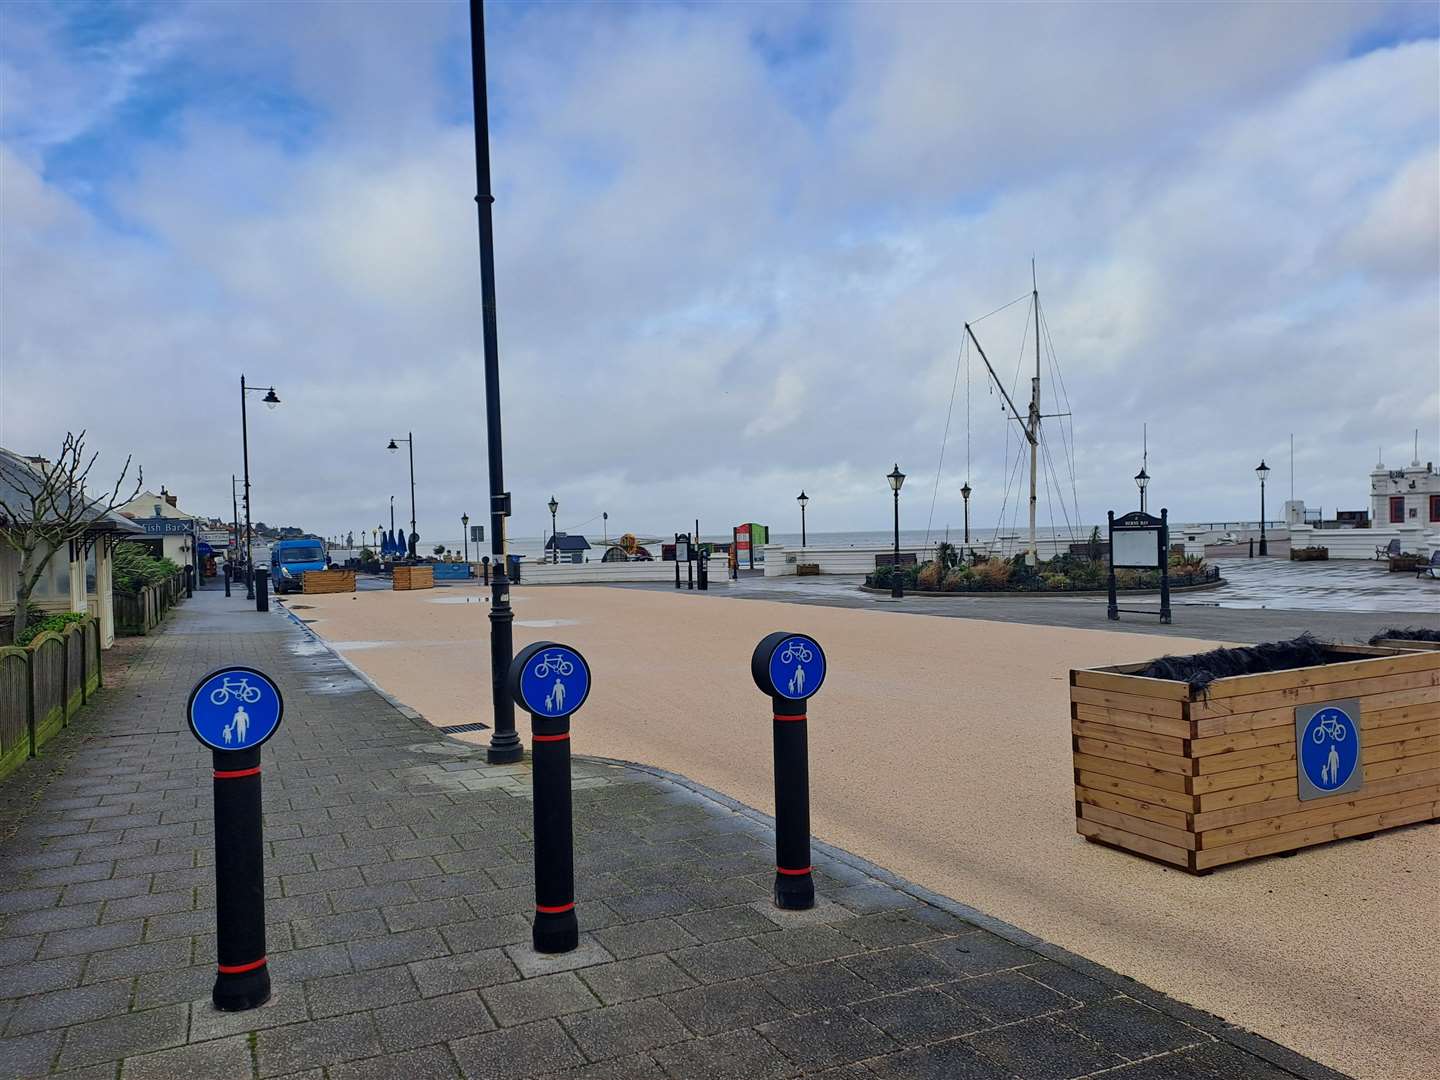 The new plaza is the result of a controversial pedestrianisation project in Herne Bay